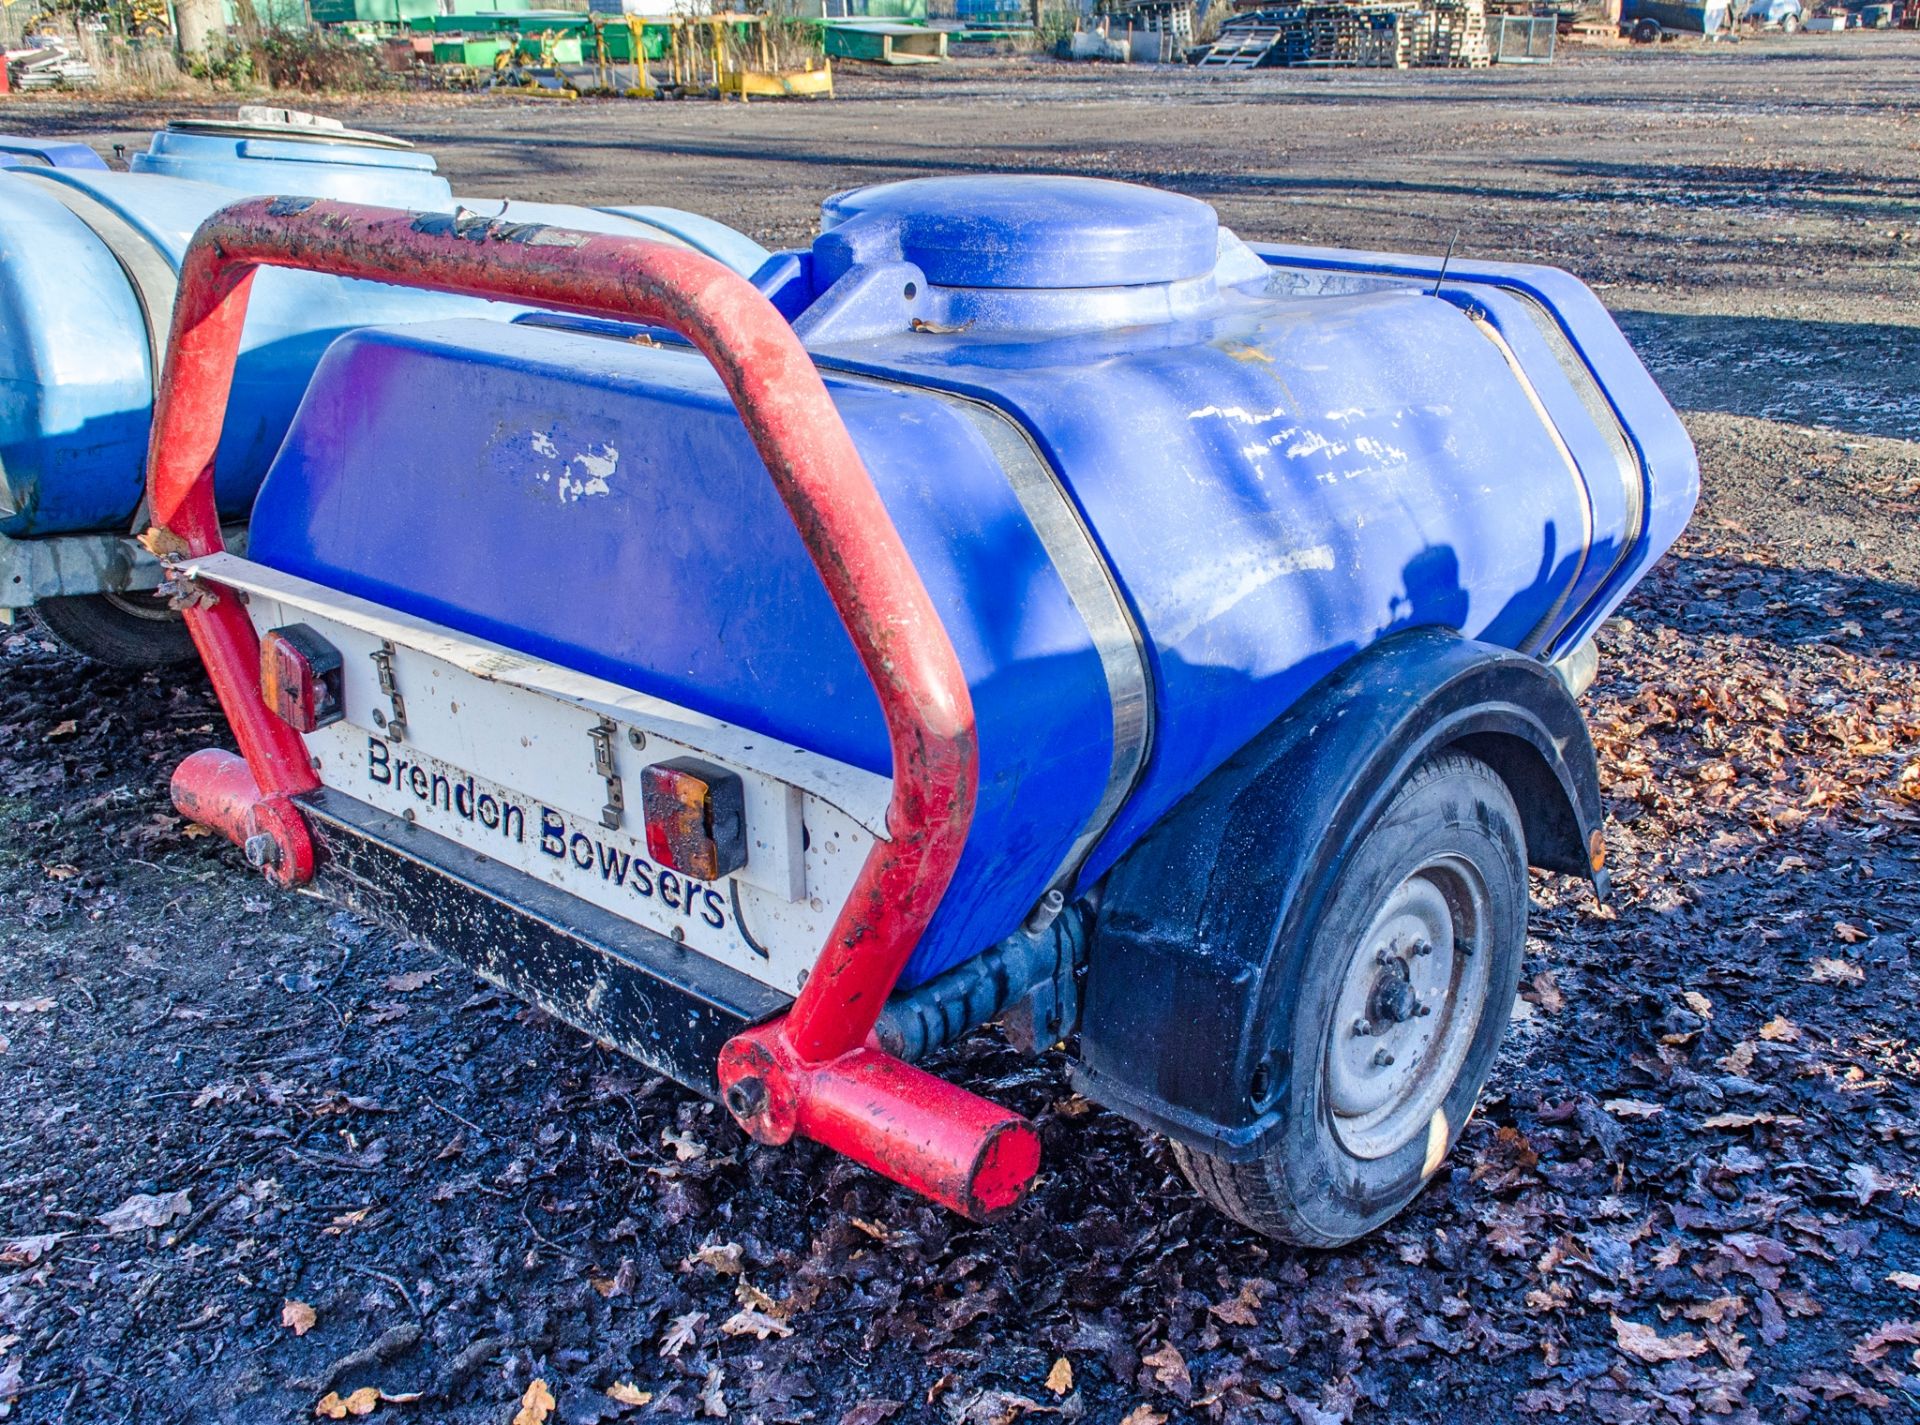 Brendon 250 gallon fast tow water bowser - Image 2 of 3